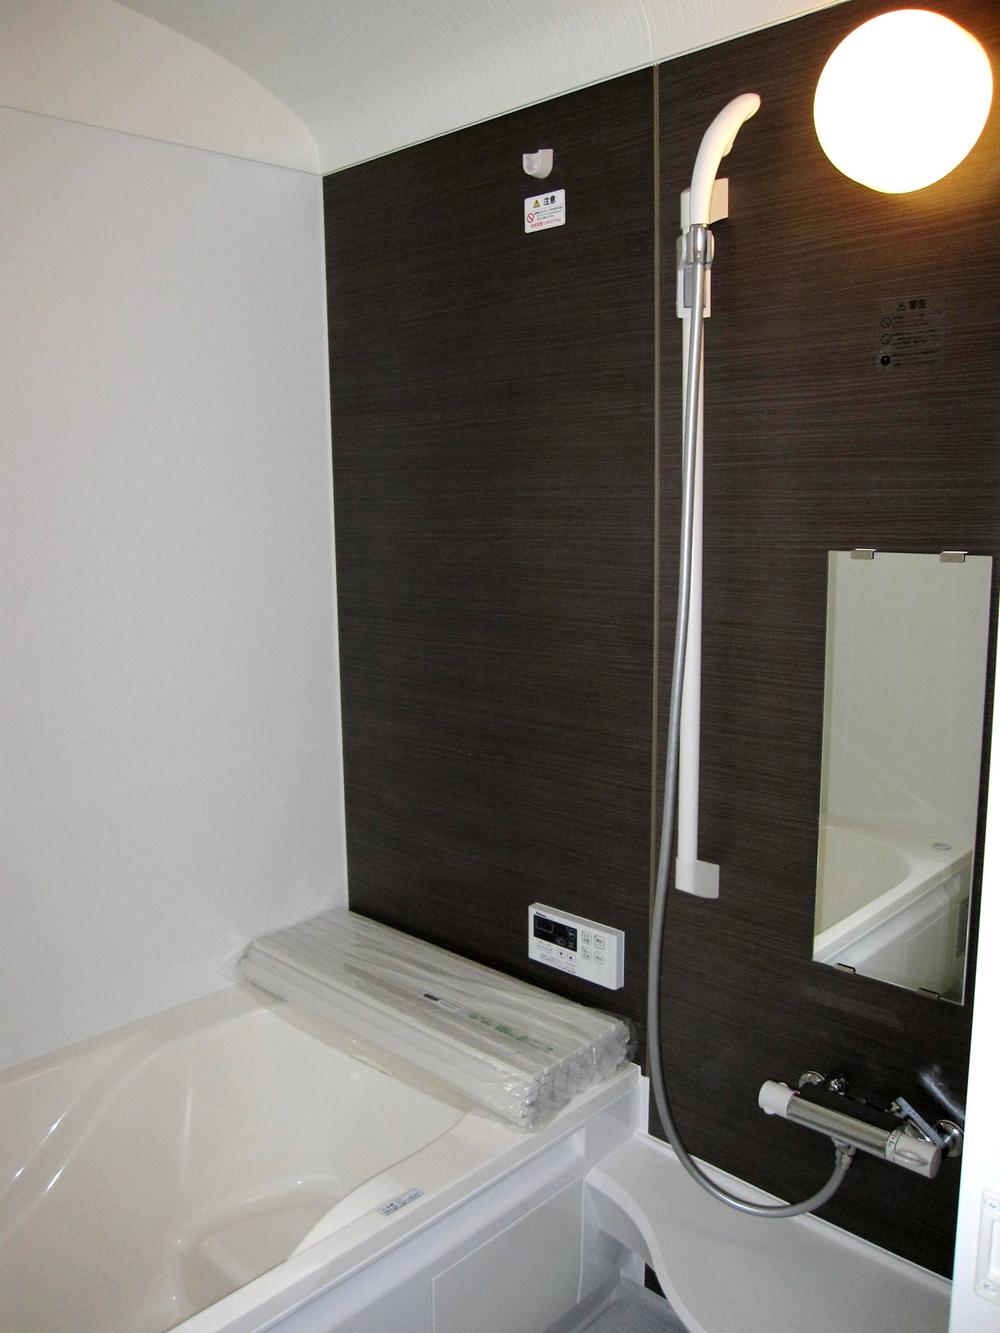 Bathroom. Unit bus with a bathroom heating drying function (spacious 1 tsubo type)